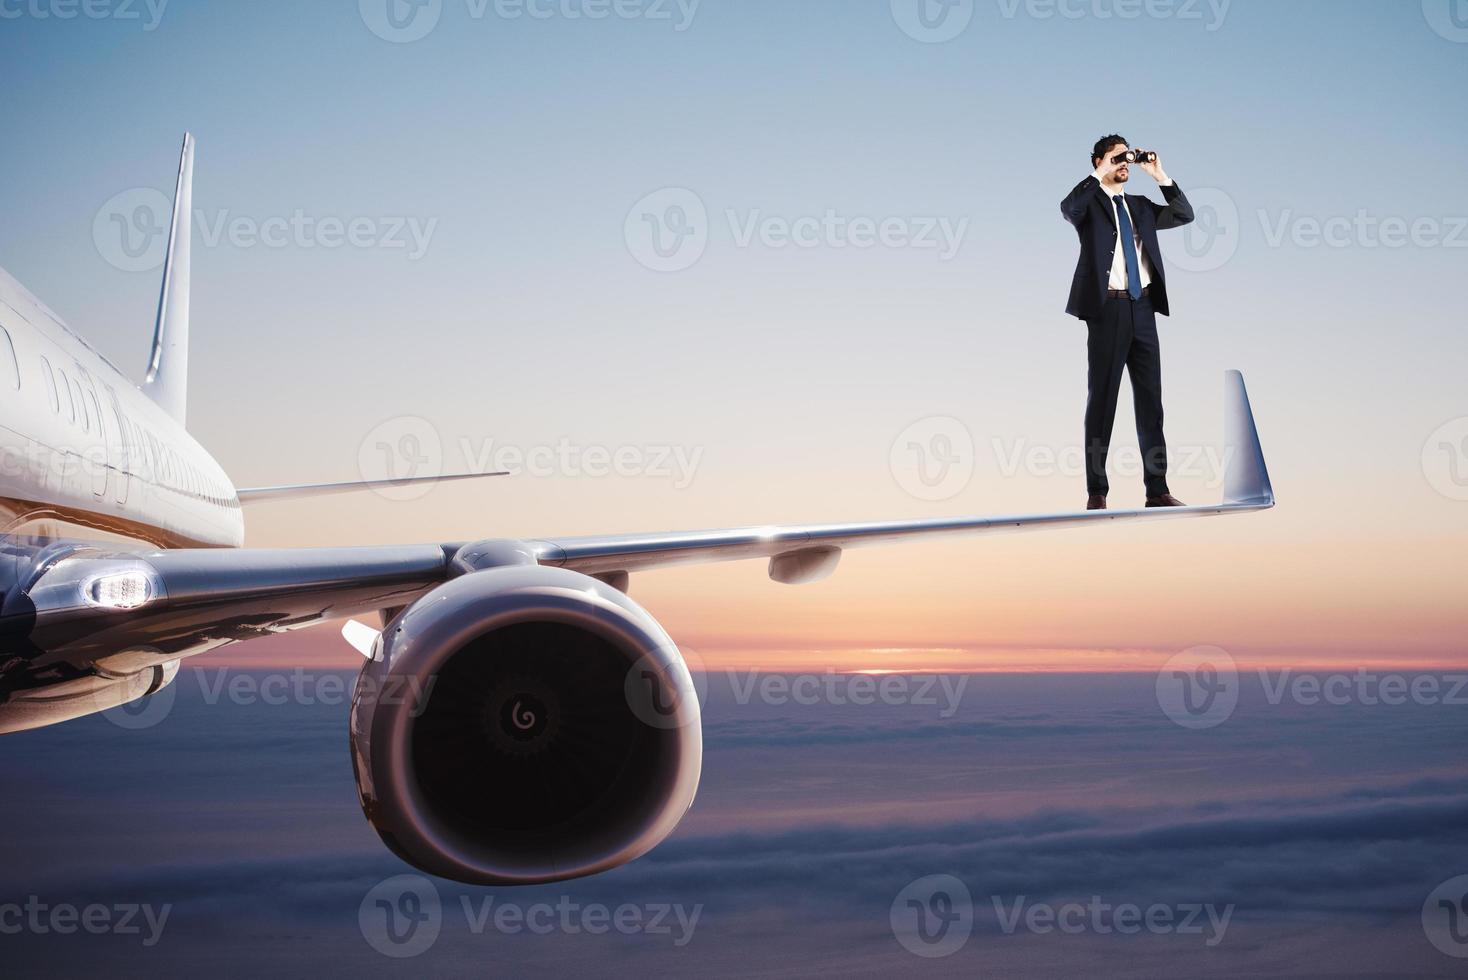 Businessman with binoculars over an aircraft searches for new business opportunities photo